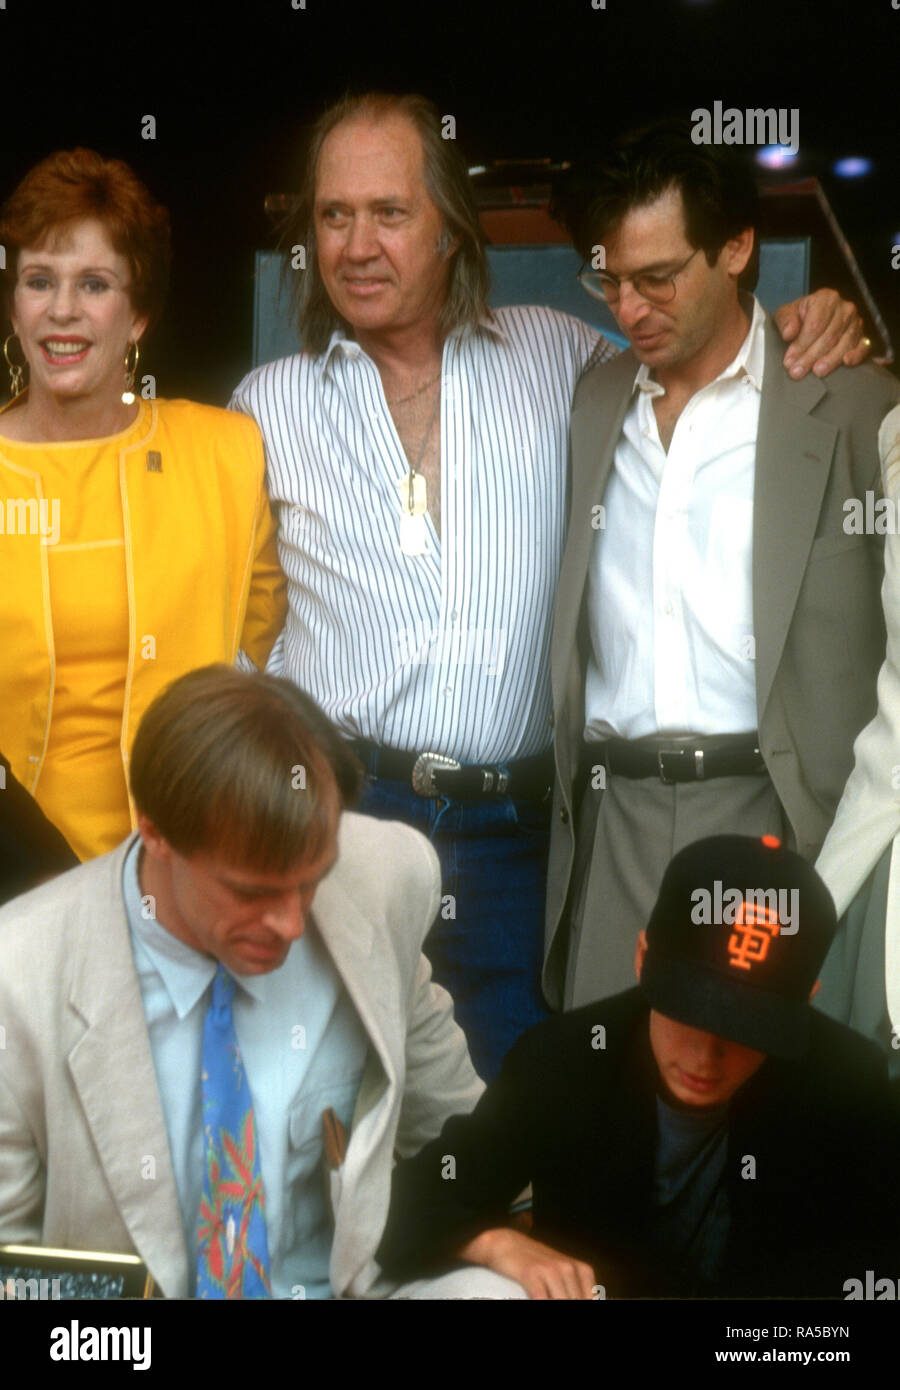 HOLLYWOOD, CA - JULY 15: Actress Carol Burnett, actor David Carradine, actor Robert Carradine, actor/honoree Keith Carradine and son Cade Carradine attend ceremony for his Star Ceremony on July 15, 1993 on Hollywood Walk of Fame in Hollywood, California. Photo by Barry King/Alamy Stock Photo Stock Photo